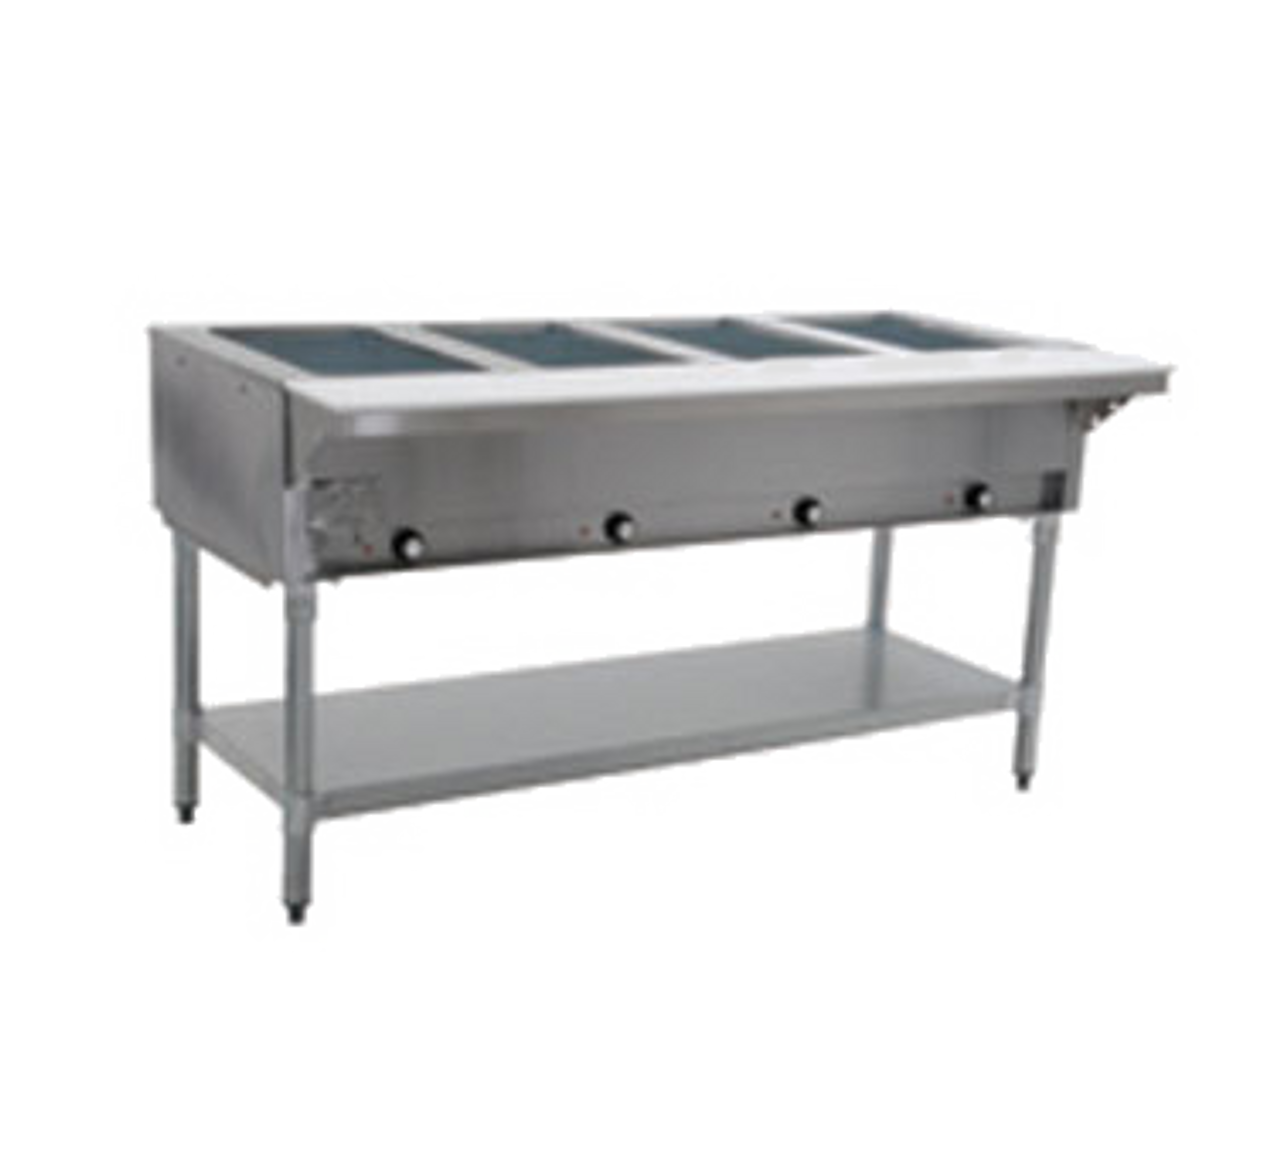 Hot Food Table, liquid propane or natural gas, open base, 63-1/2"W, (4) 12" x 20" (dry) wells with burner controls in recessed panel, adjustable gas valve & pilot light per burner, 22/430 stainless steel top & body, 8"D polyethylene cutting board, galvanized undershelf, 1-5/8" dia. galvanized tubular legs, adjustable plastic feet, gas regulator included, 14,000 BTU, NSF, cULus (must be used with Eagle Group Spillage Pans #302027 or #304141)